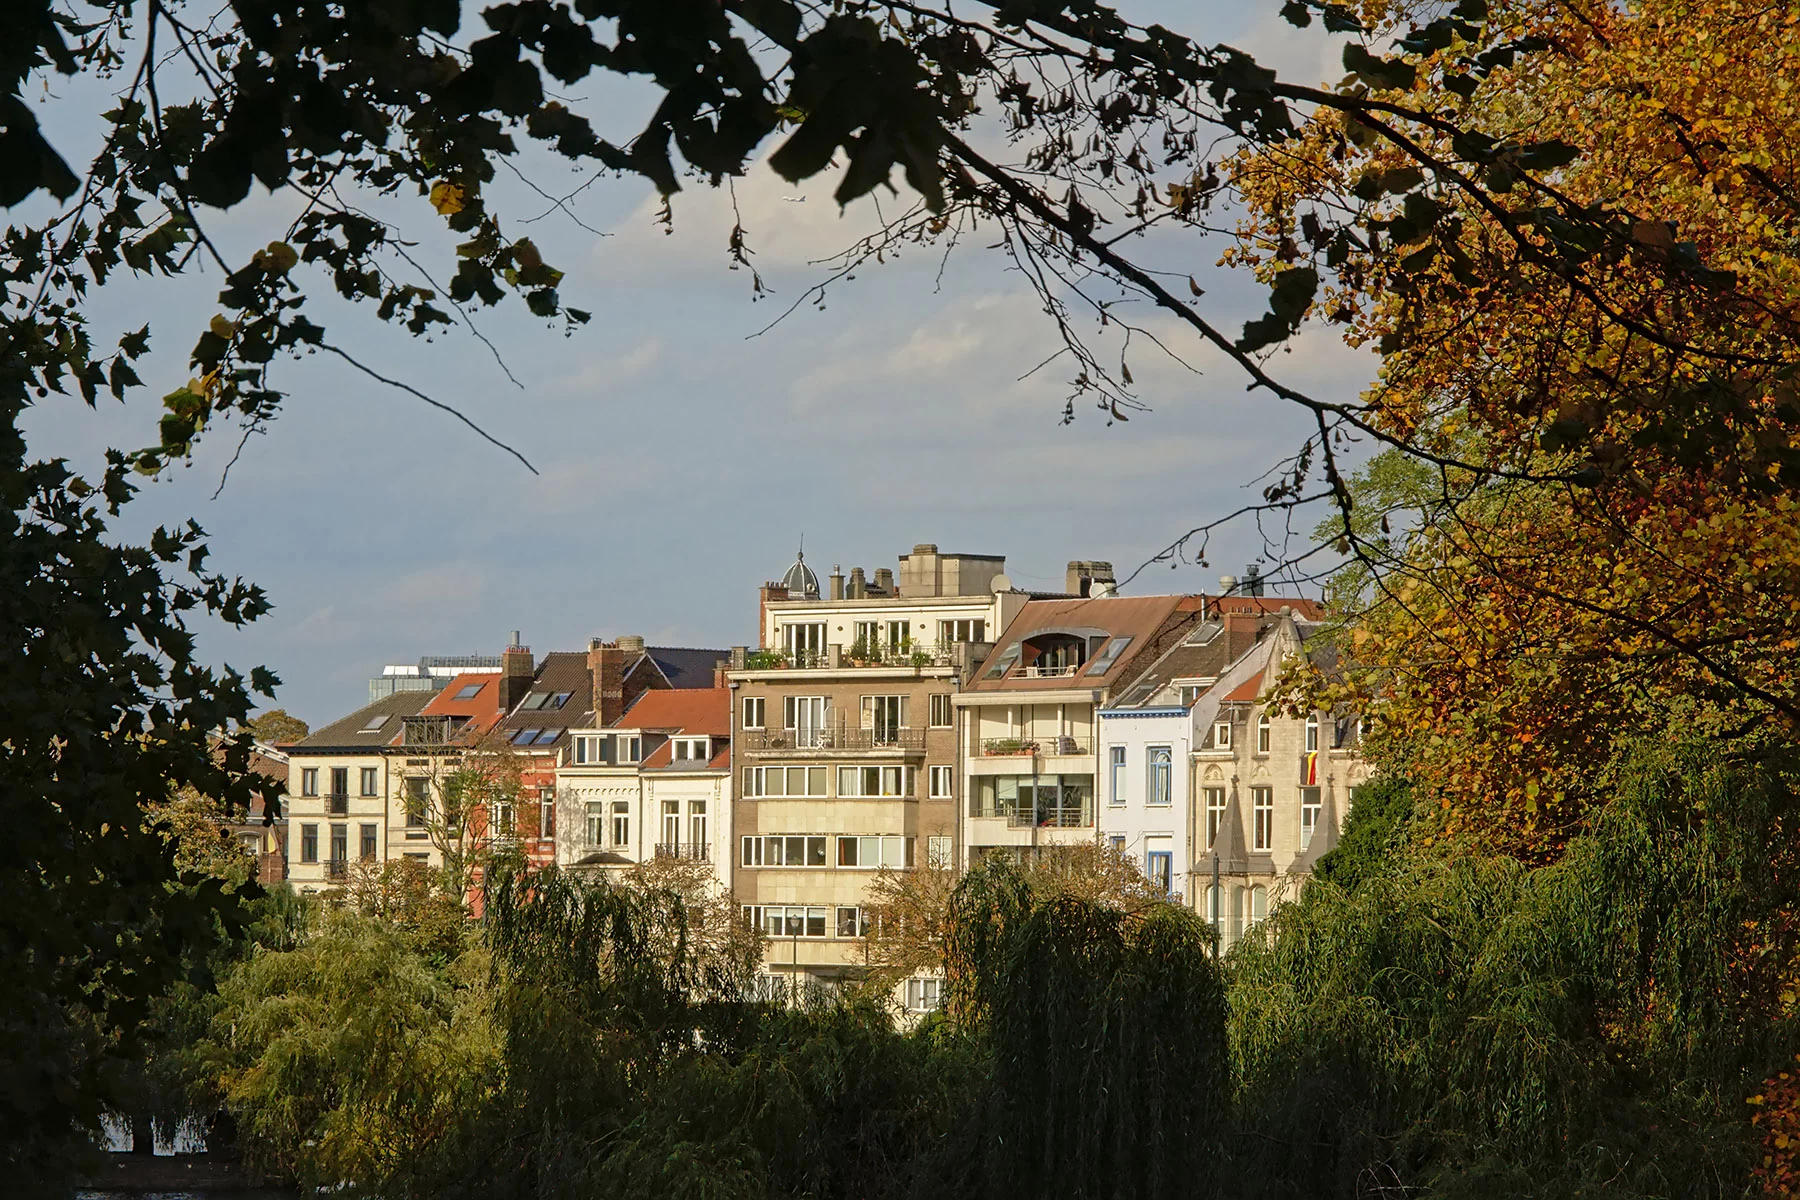 Typical houses in Ixelles